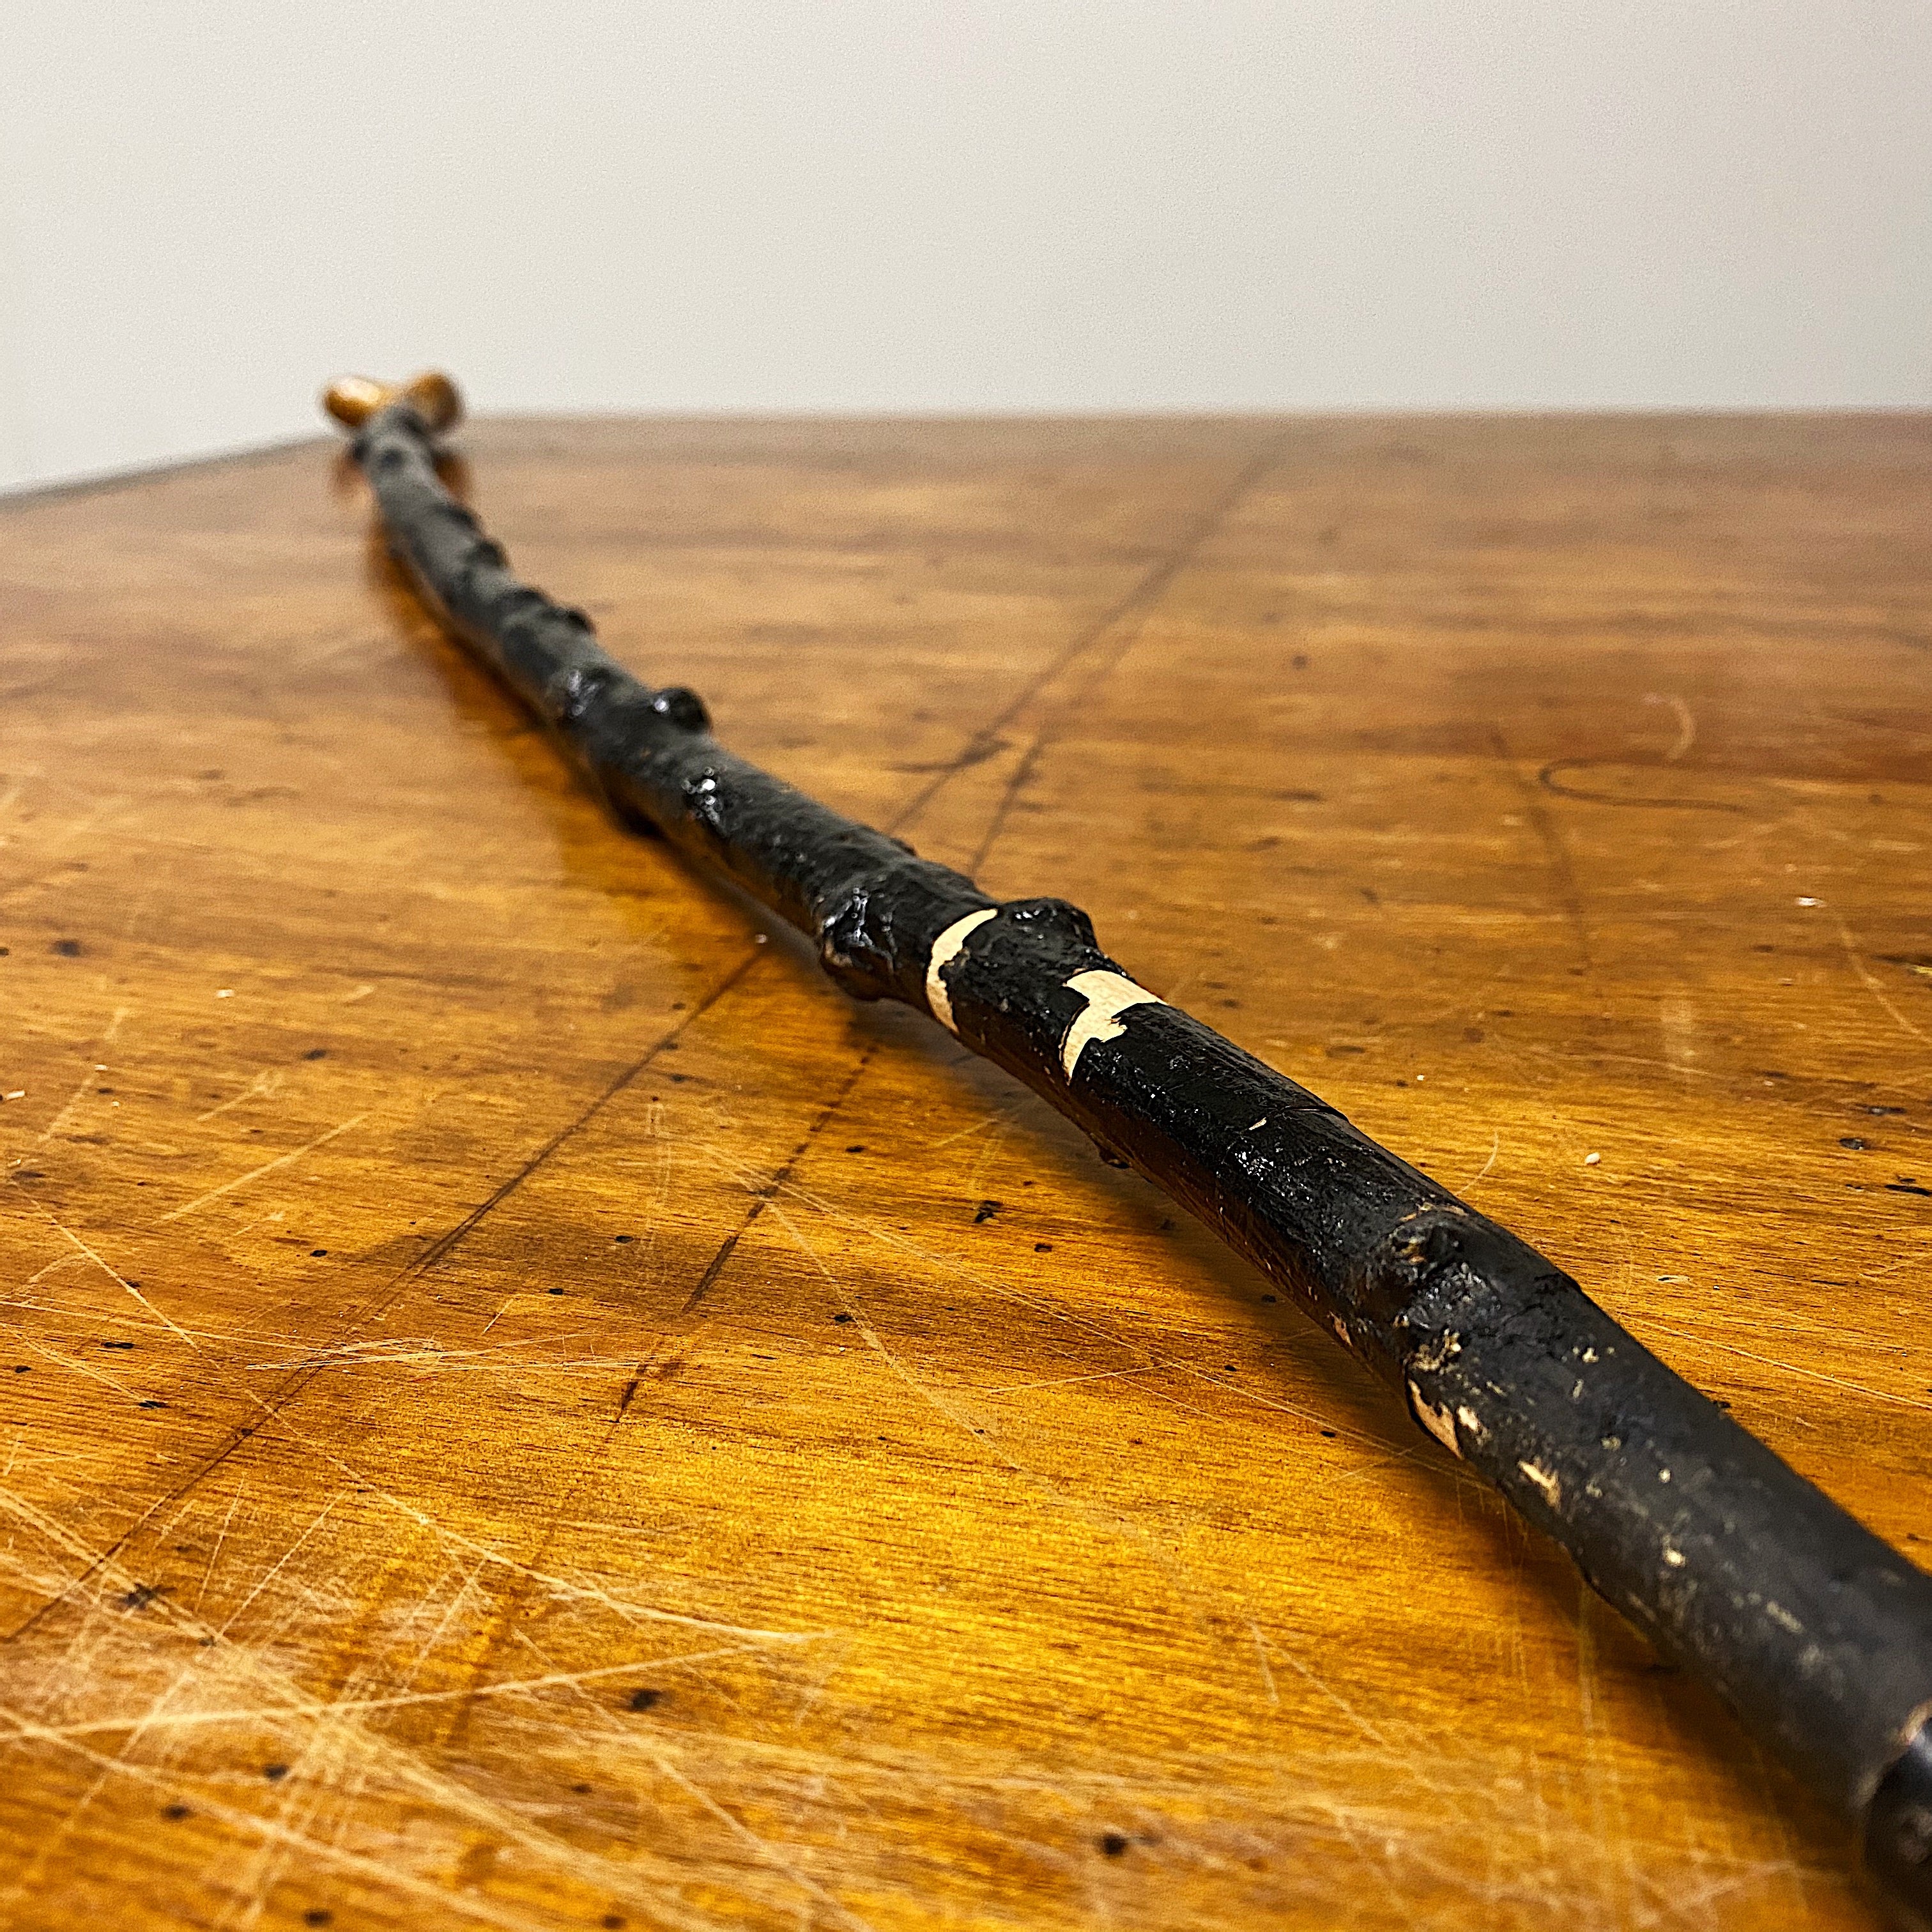 Antique Irish Shillelagh Blackthorn Cane Early 1900s Mad Van Antiques 4630